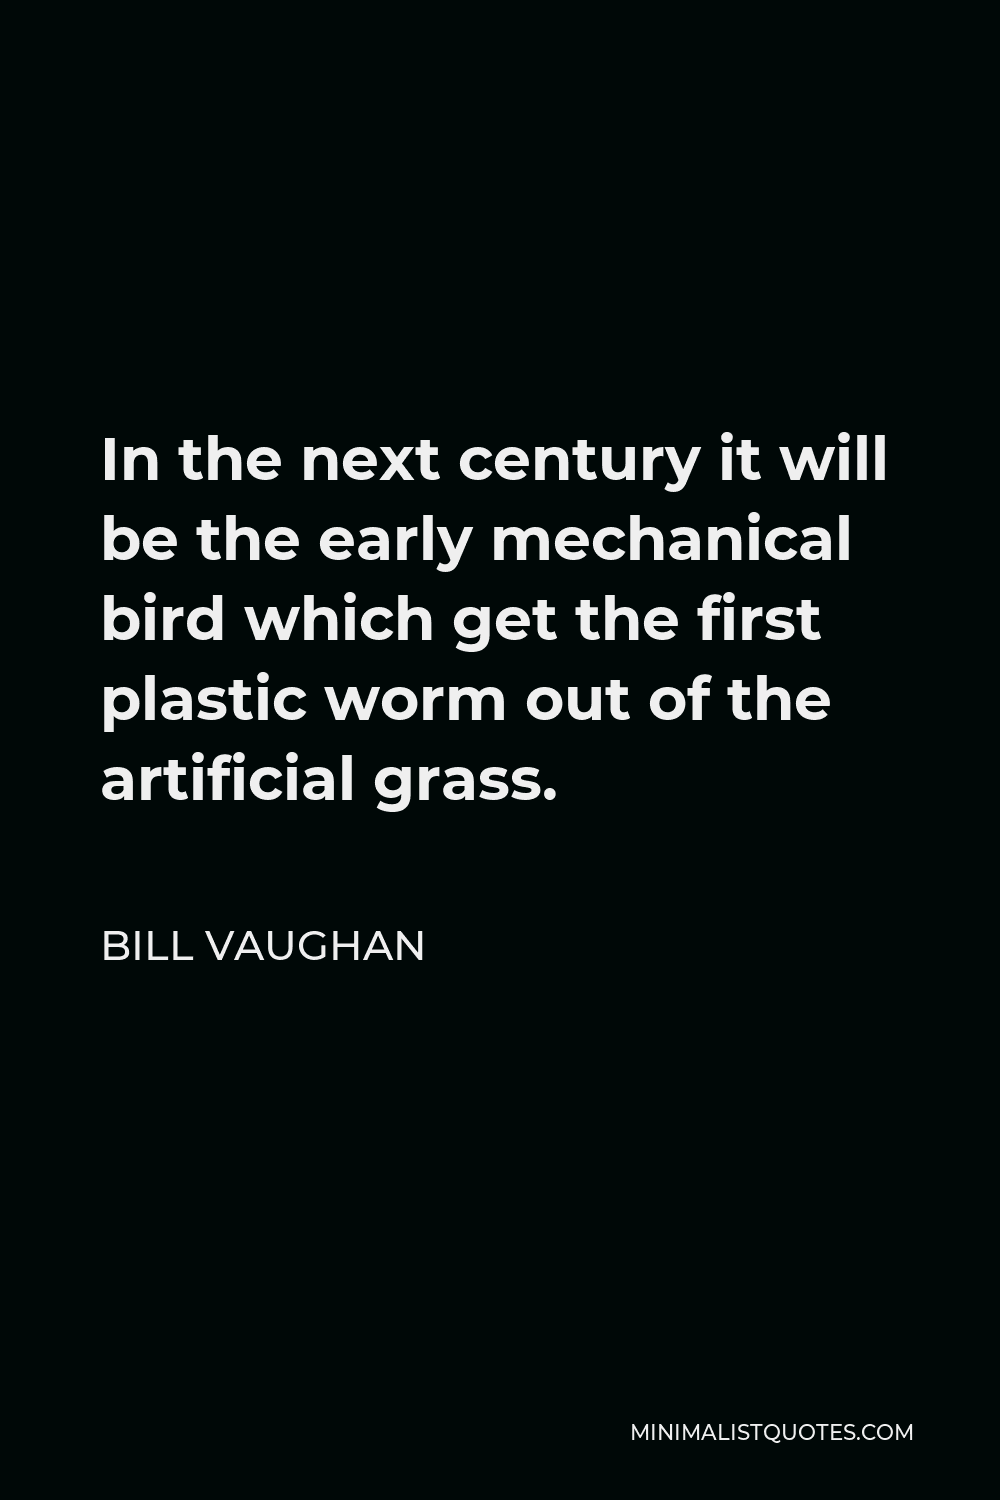 Bill Vaughan Quote - In the next century it will be the early mechanical bird which get the first plastic worm out of the artificial grass.